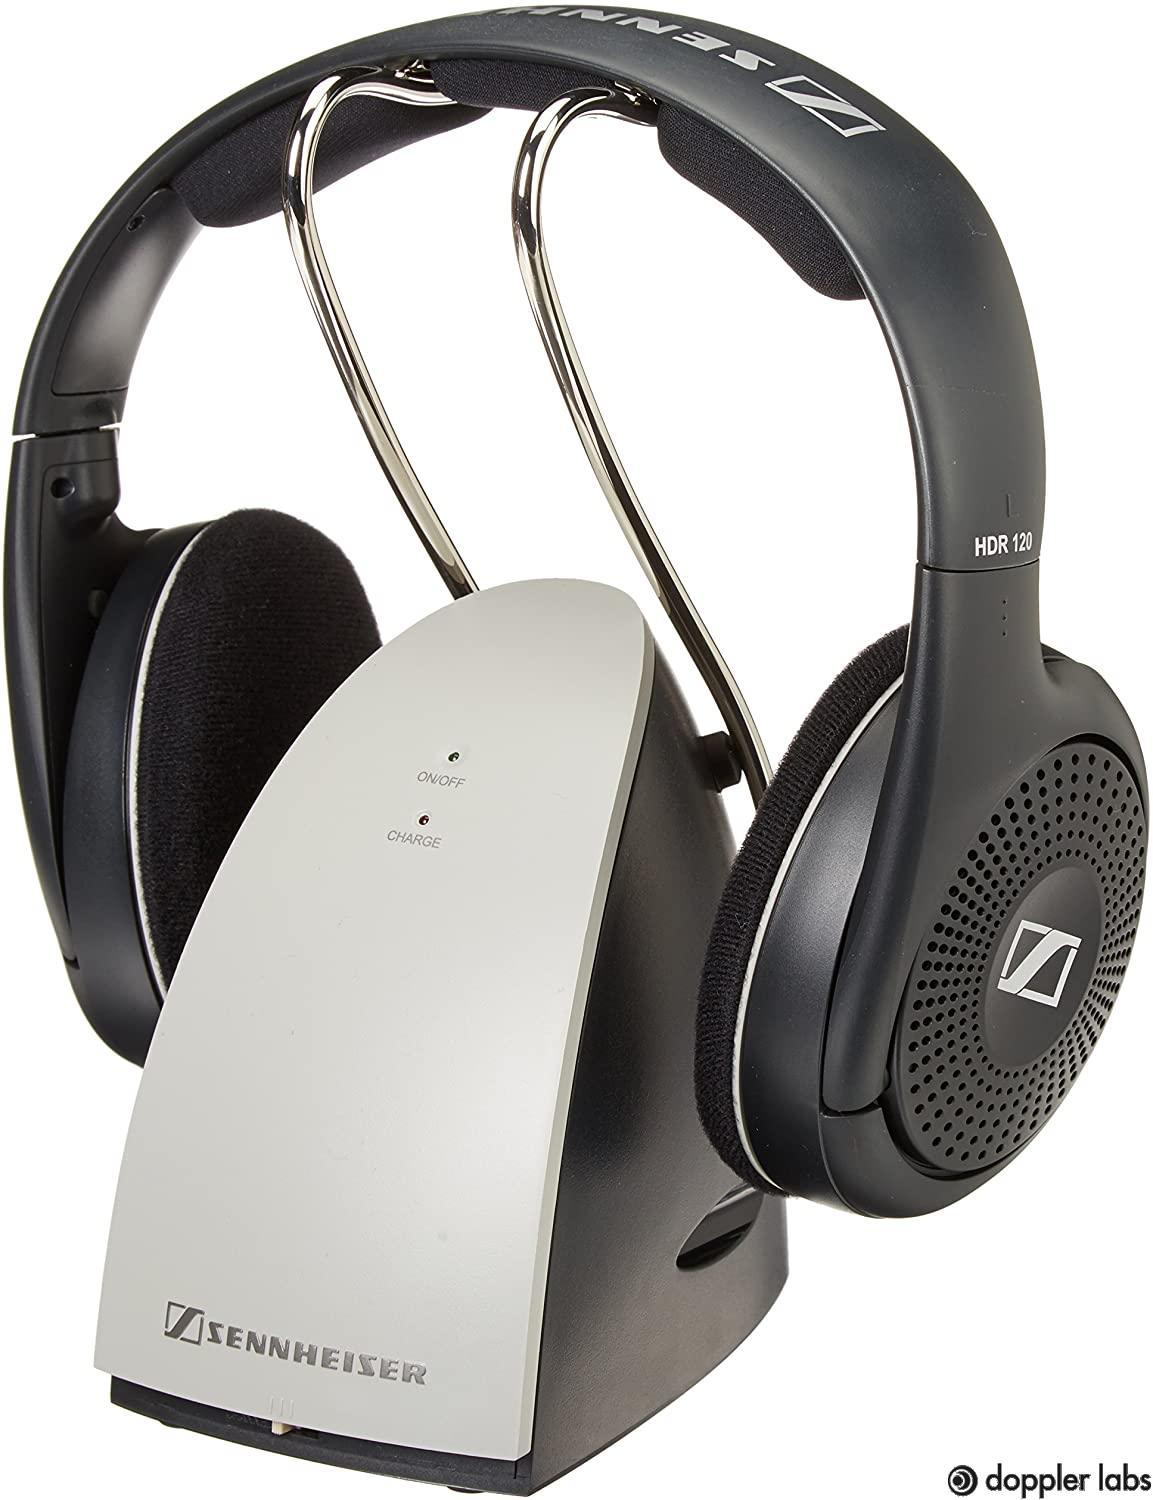 The Sennheiser RS120 is the classic that started it all